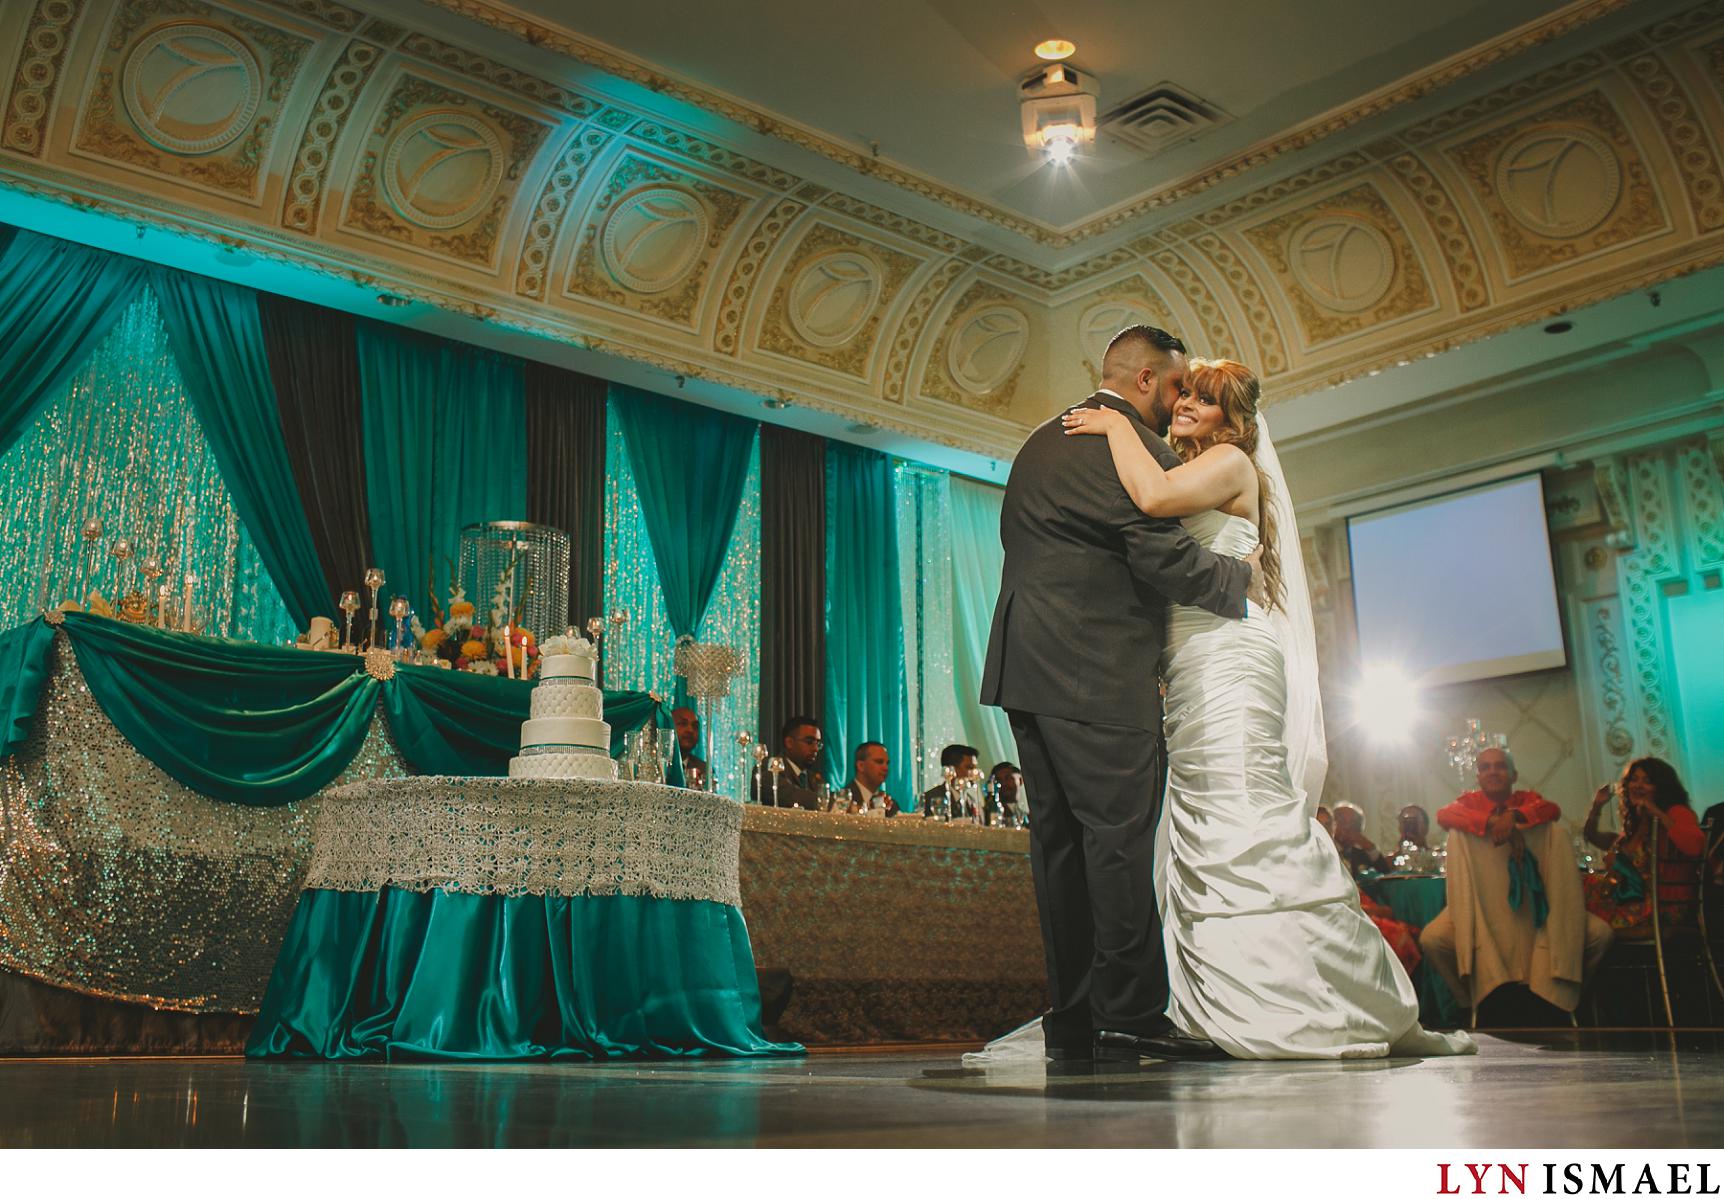 The bride and groom's first dance inside Paradise Banquet Hall in Vaughan, Ontario.